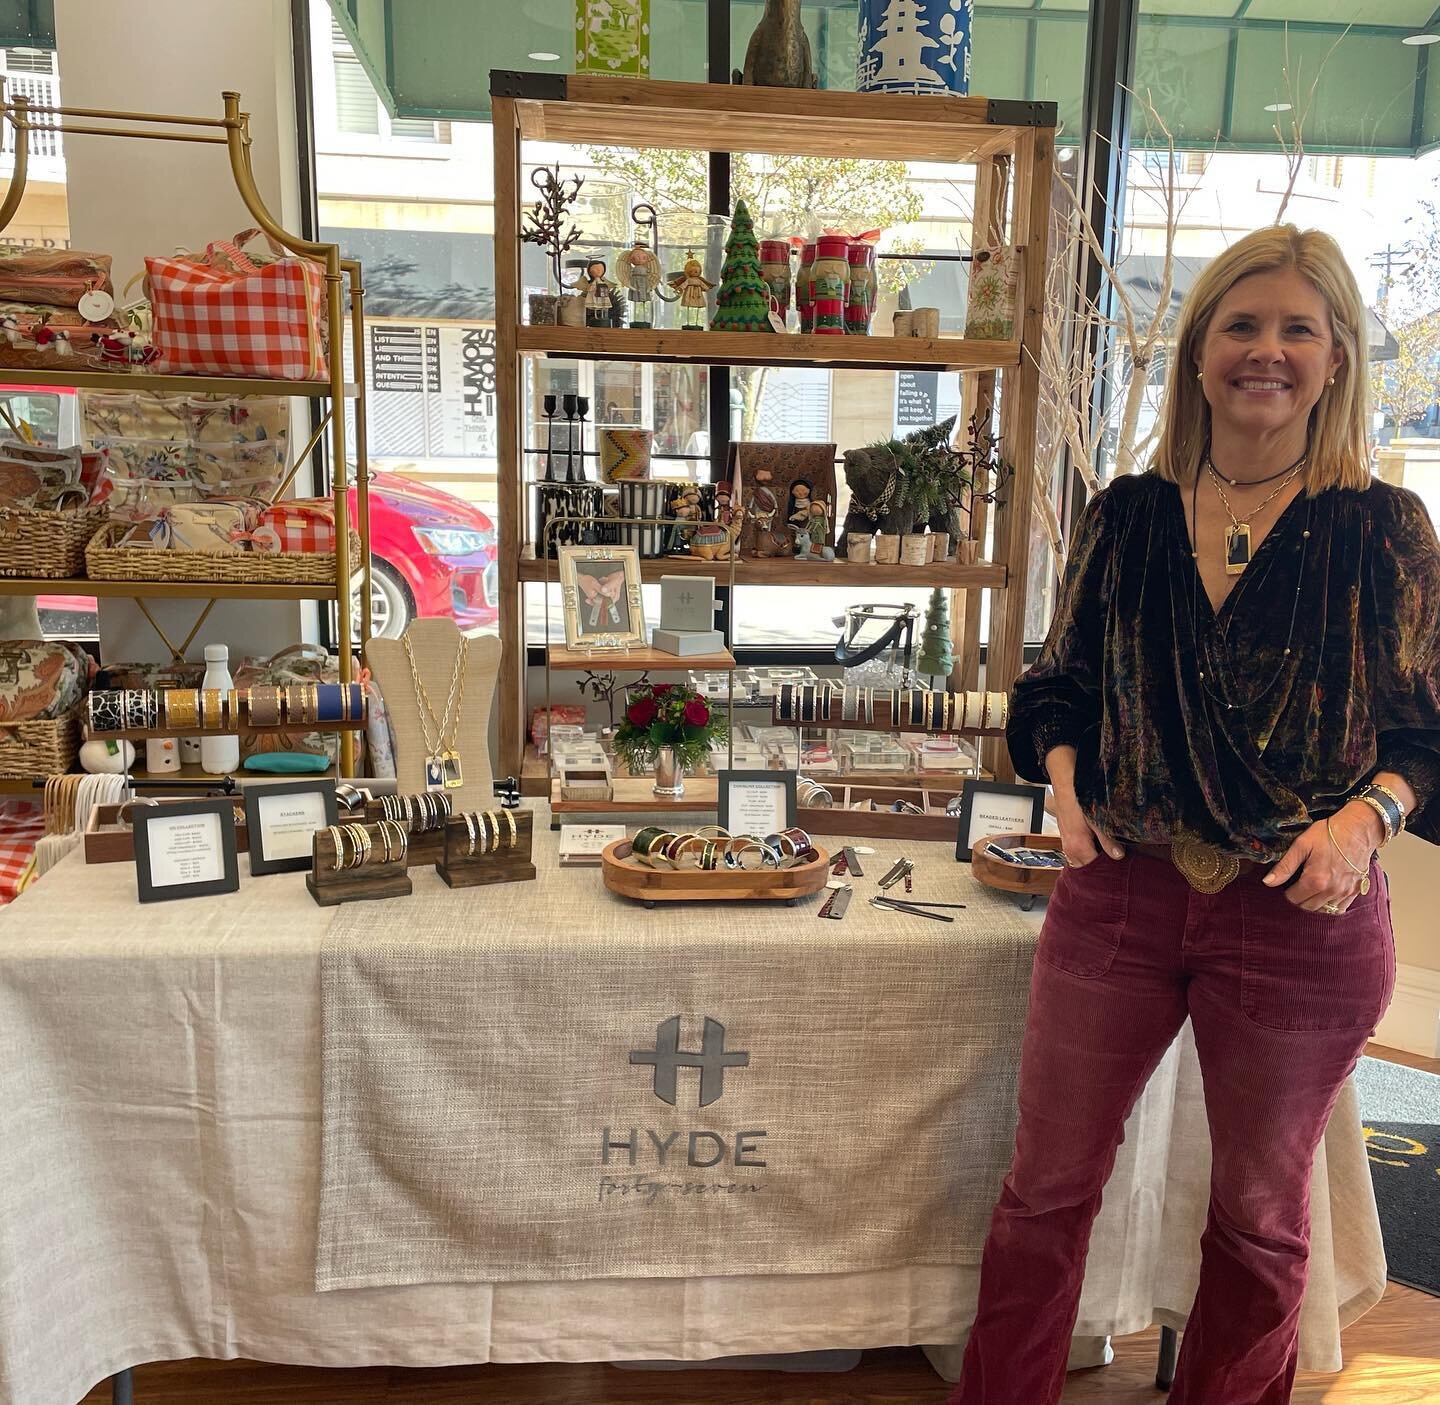 🎈🎈🎈Going on NOW, until 4pm today! We&rsquo;ve been counting down and are so excited to have Ann and her stunning jewelry line at the shop! These are must see pieces of jewelry! Create your own! Create gifts! Oh my! Grab a cookie and play jewelry d